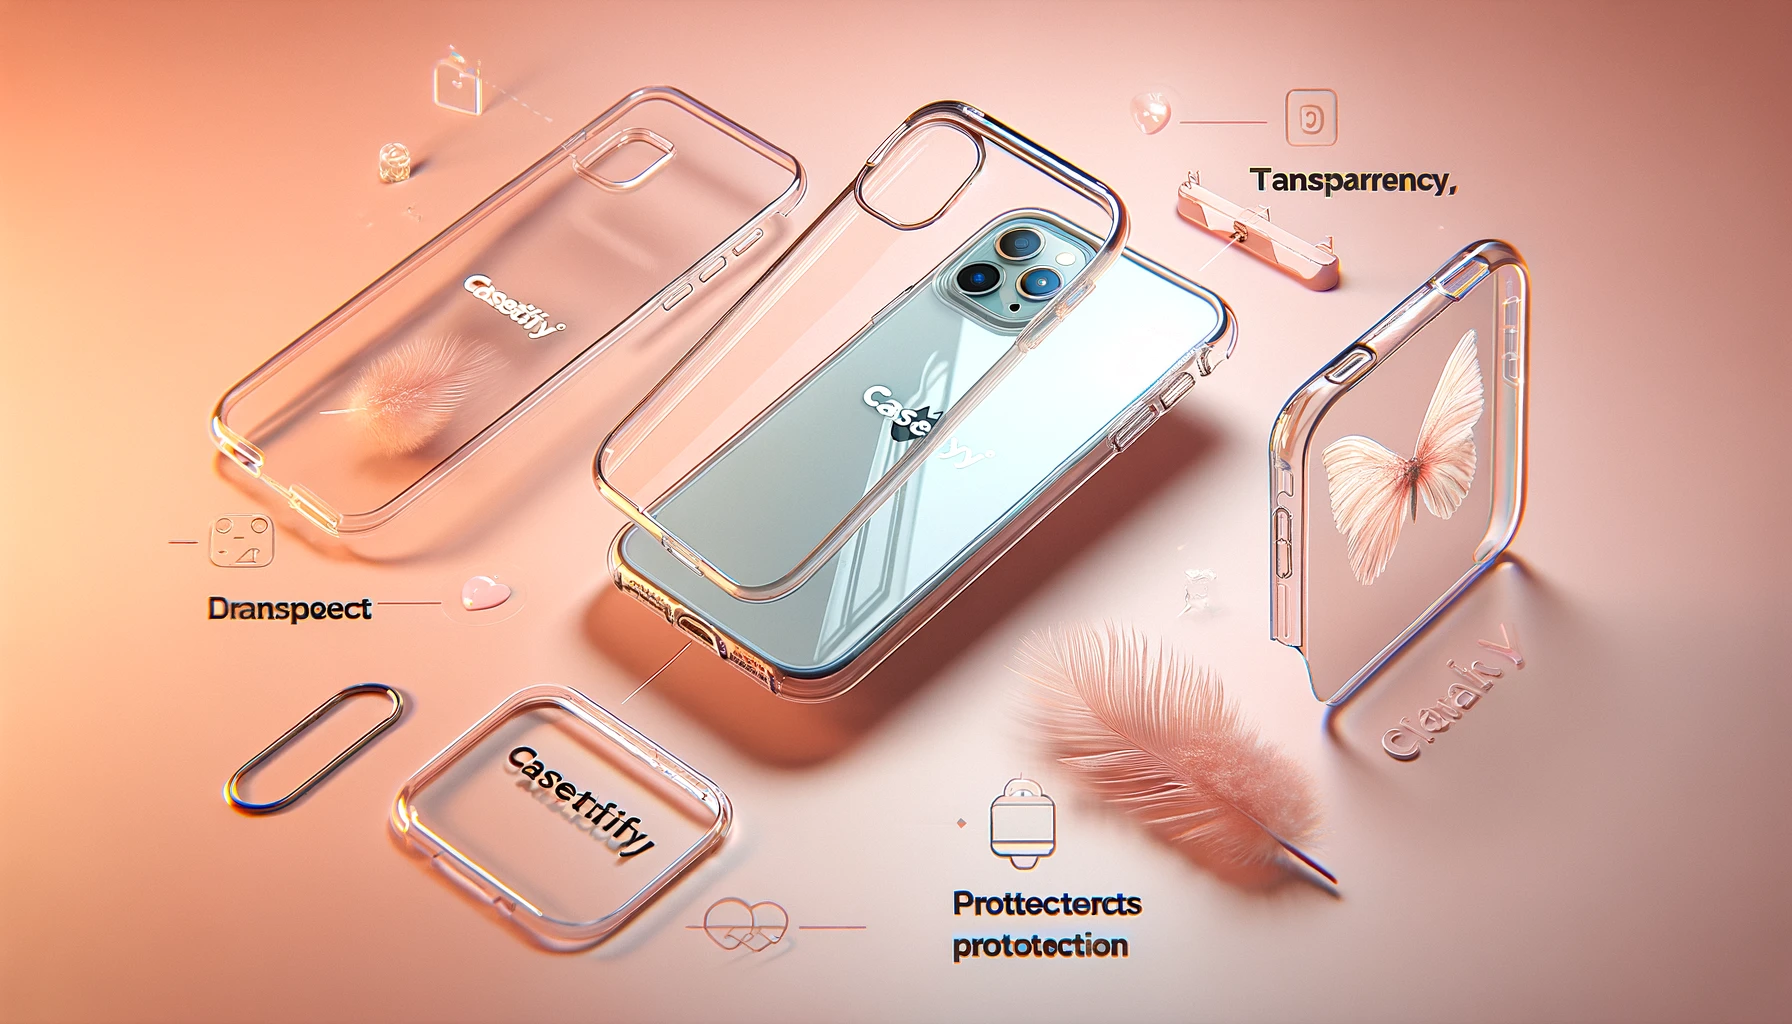 An image highlighting the features and appeal of CASETiFY clear cases. Show the transparency, sleek design, and protection features with the word 'CASETiFY' prominently displayed.